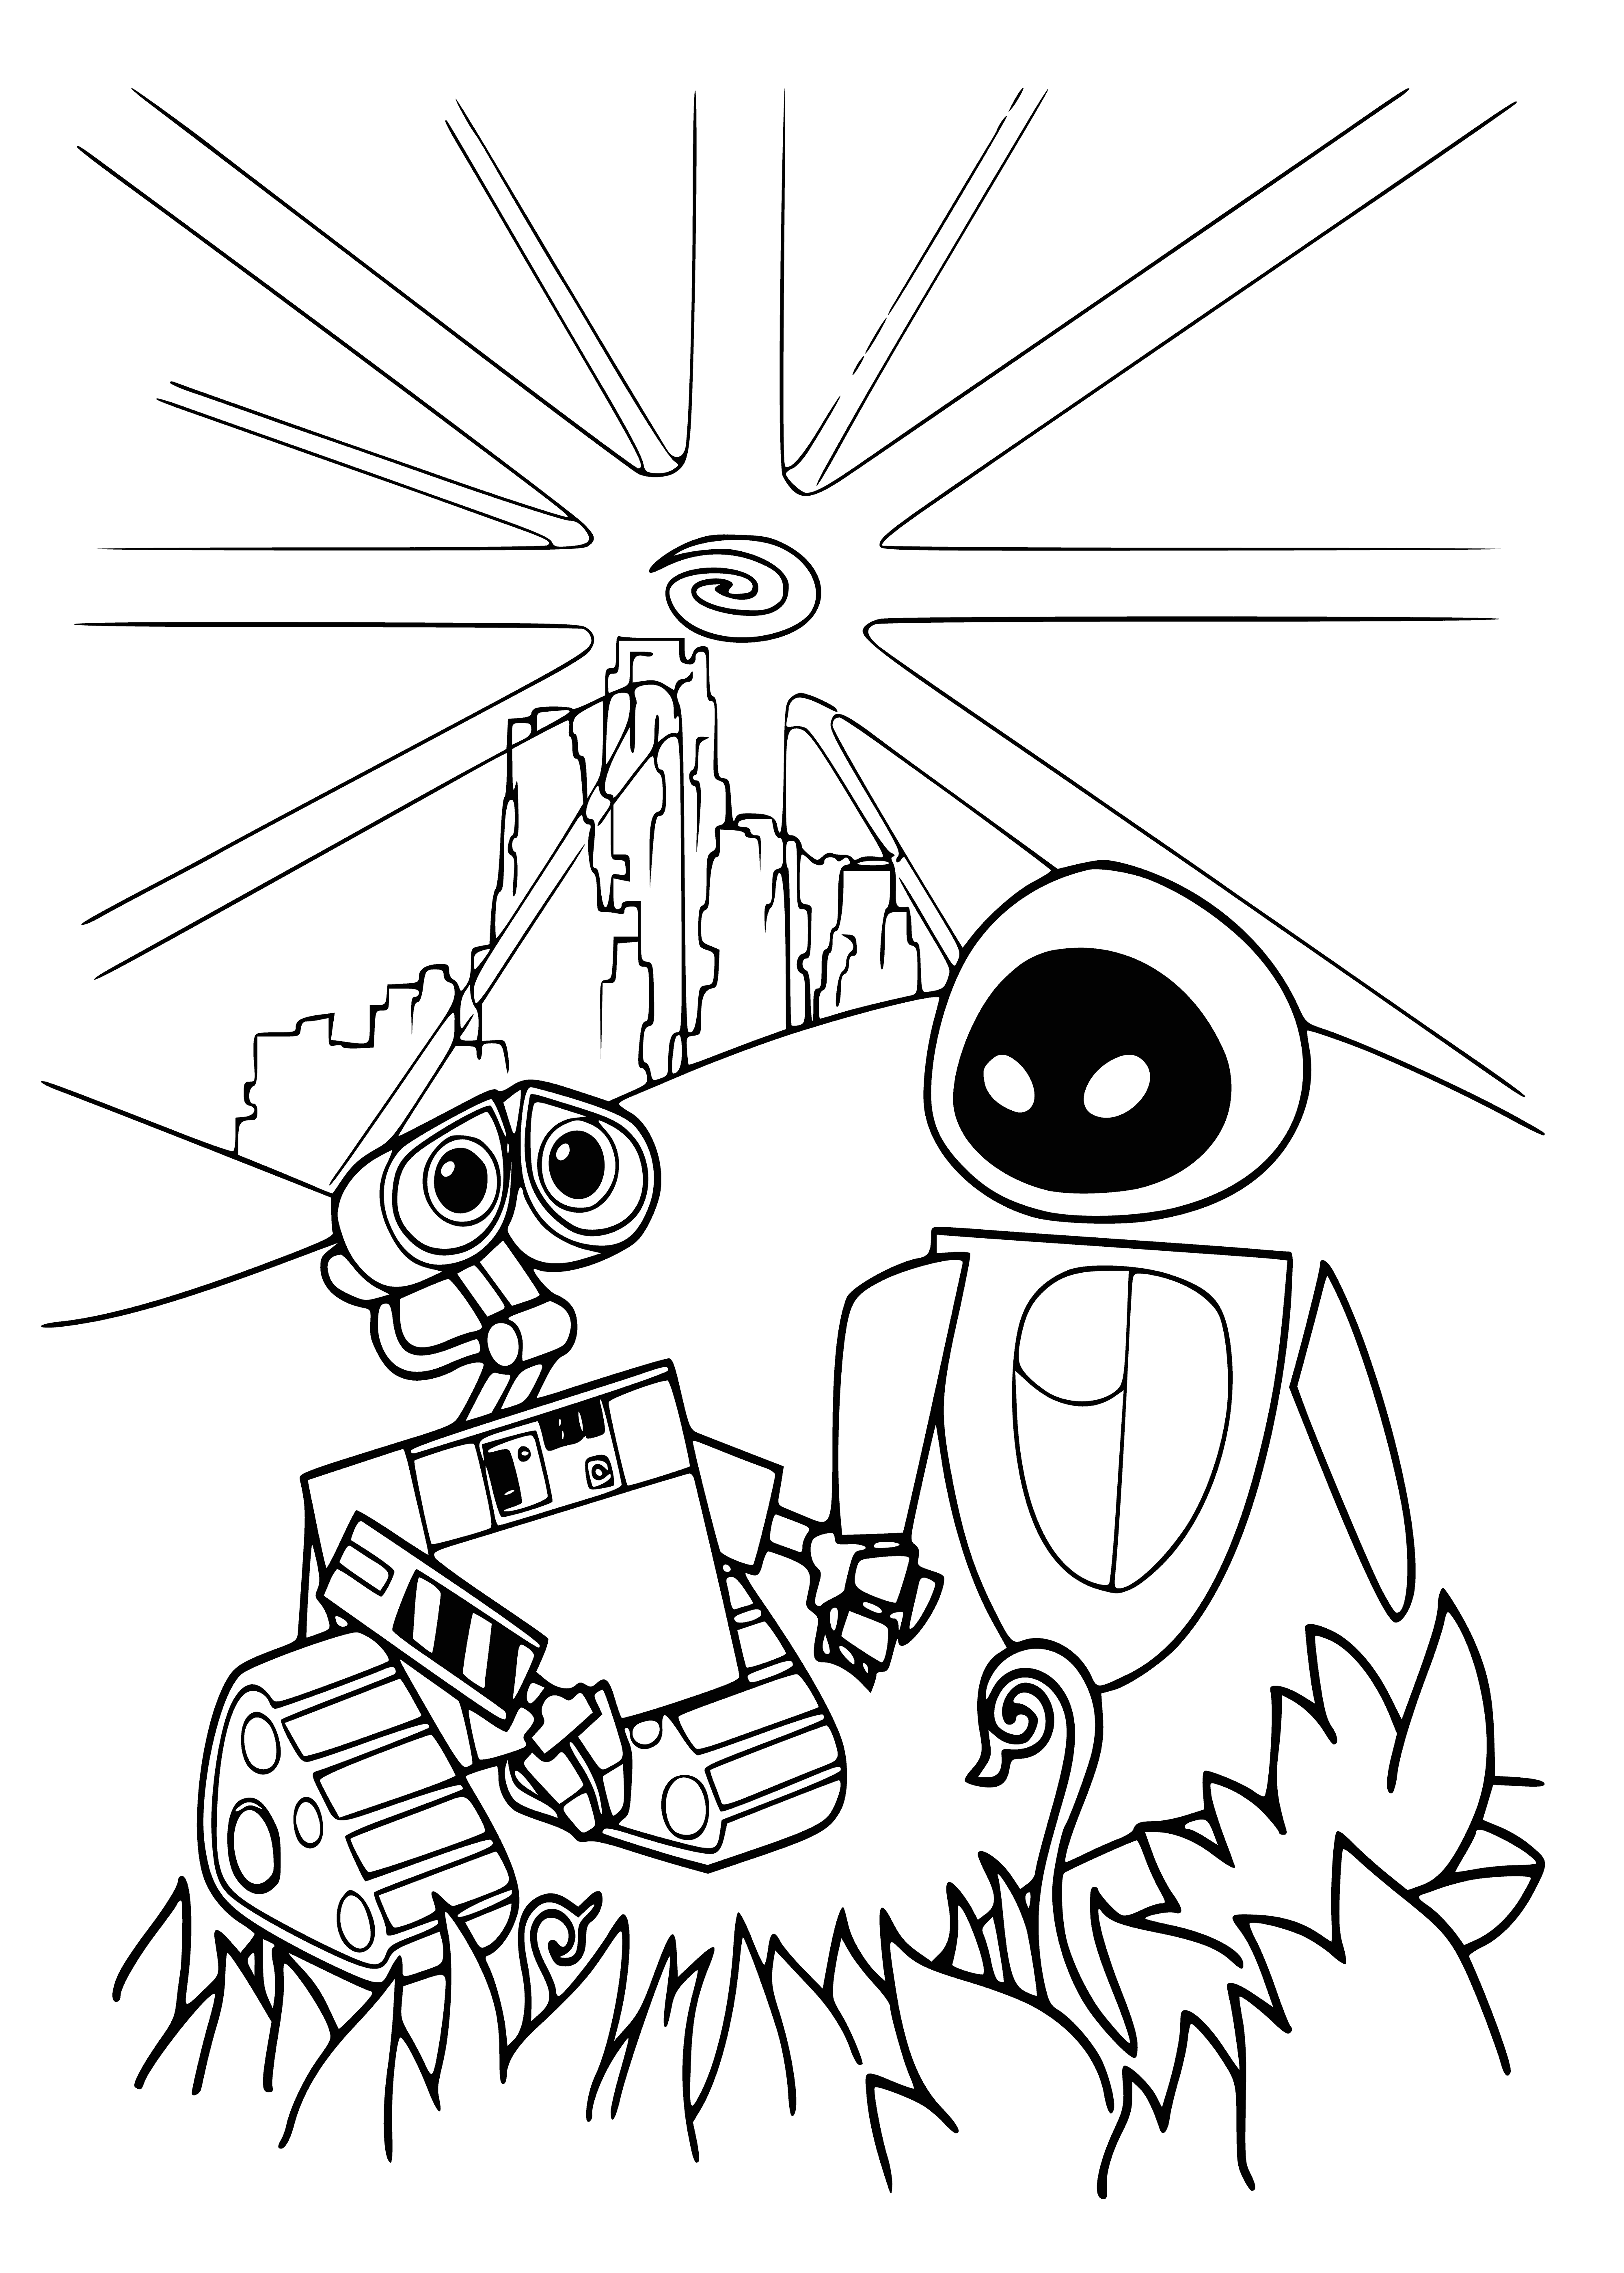 coloring page: Wall-e is a robot designed to clean up the Earth. He has arms, legs, a camera for a head and a hose. On the left side of the page, there are three plants with a lightbulb above them. #Wall-e #plants #robot #cleaning